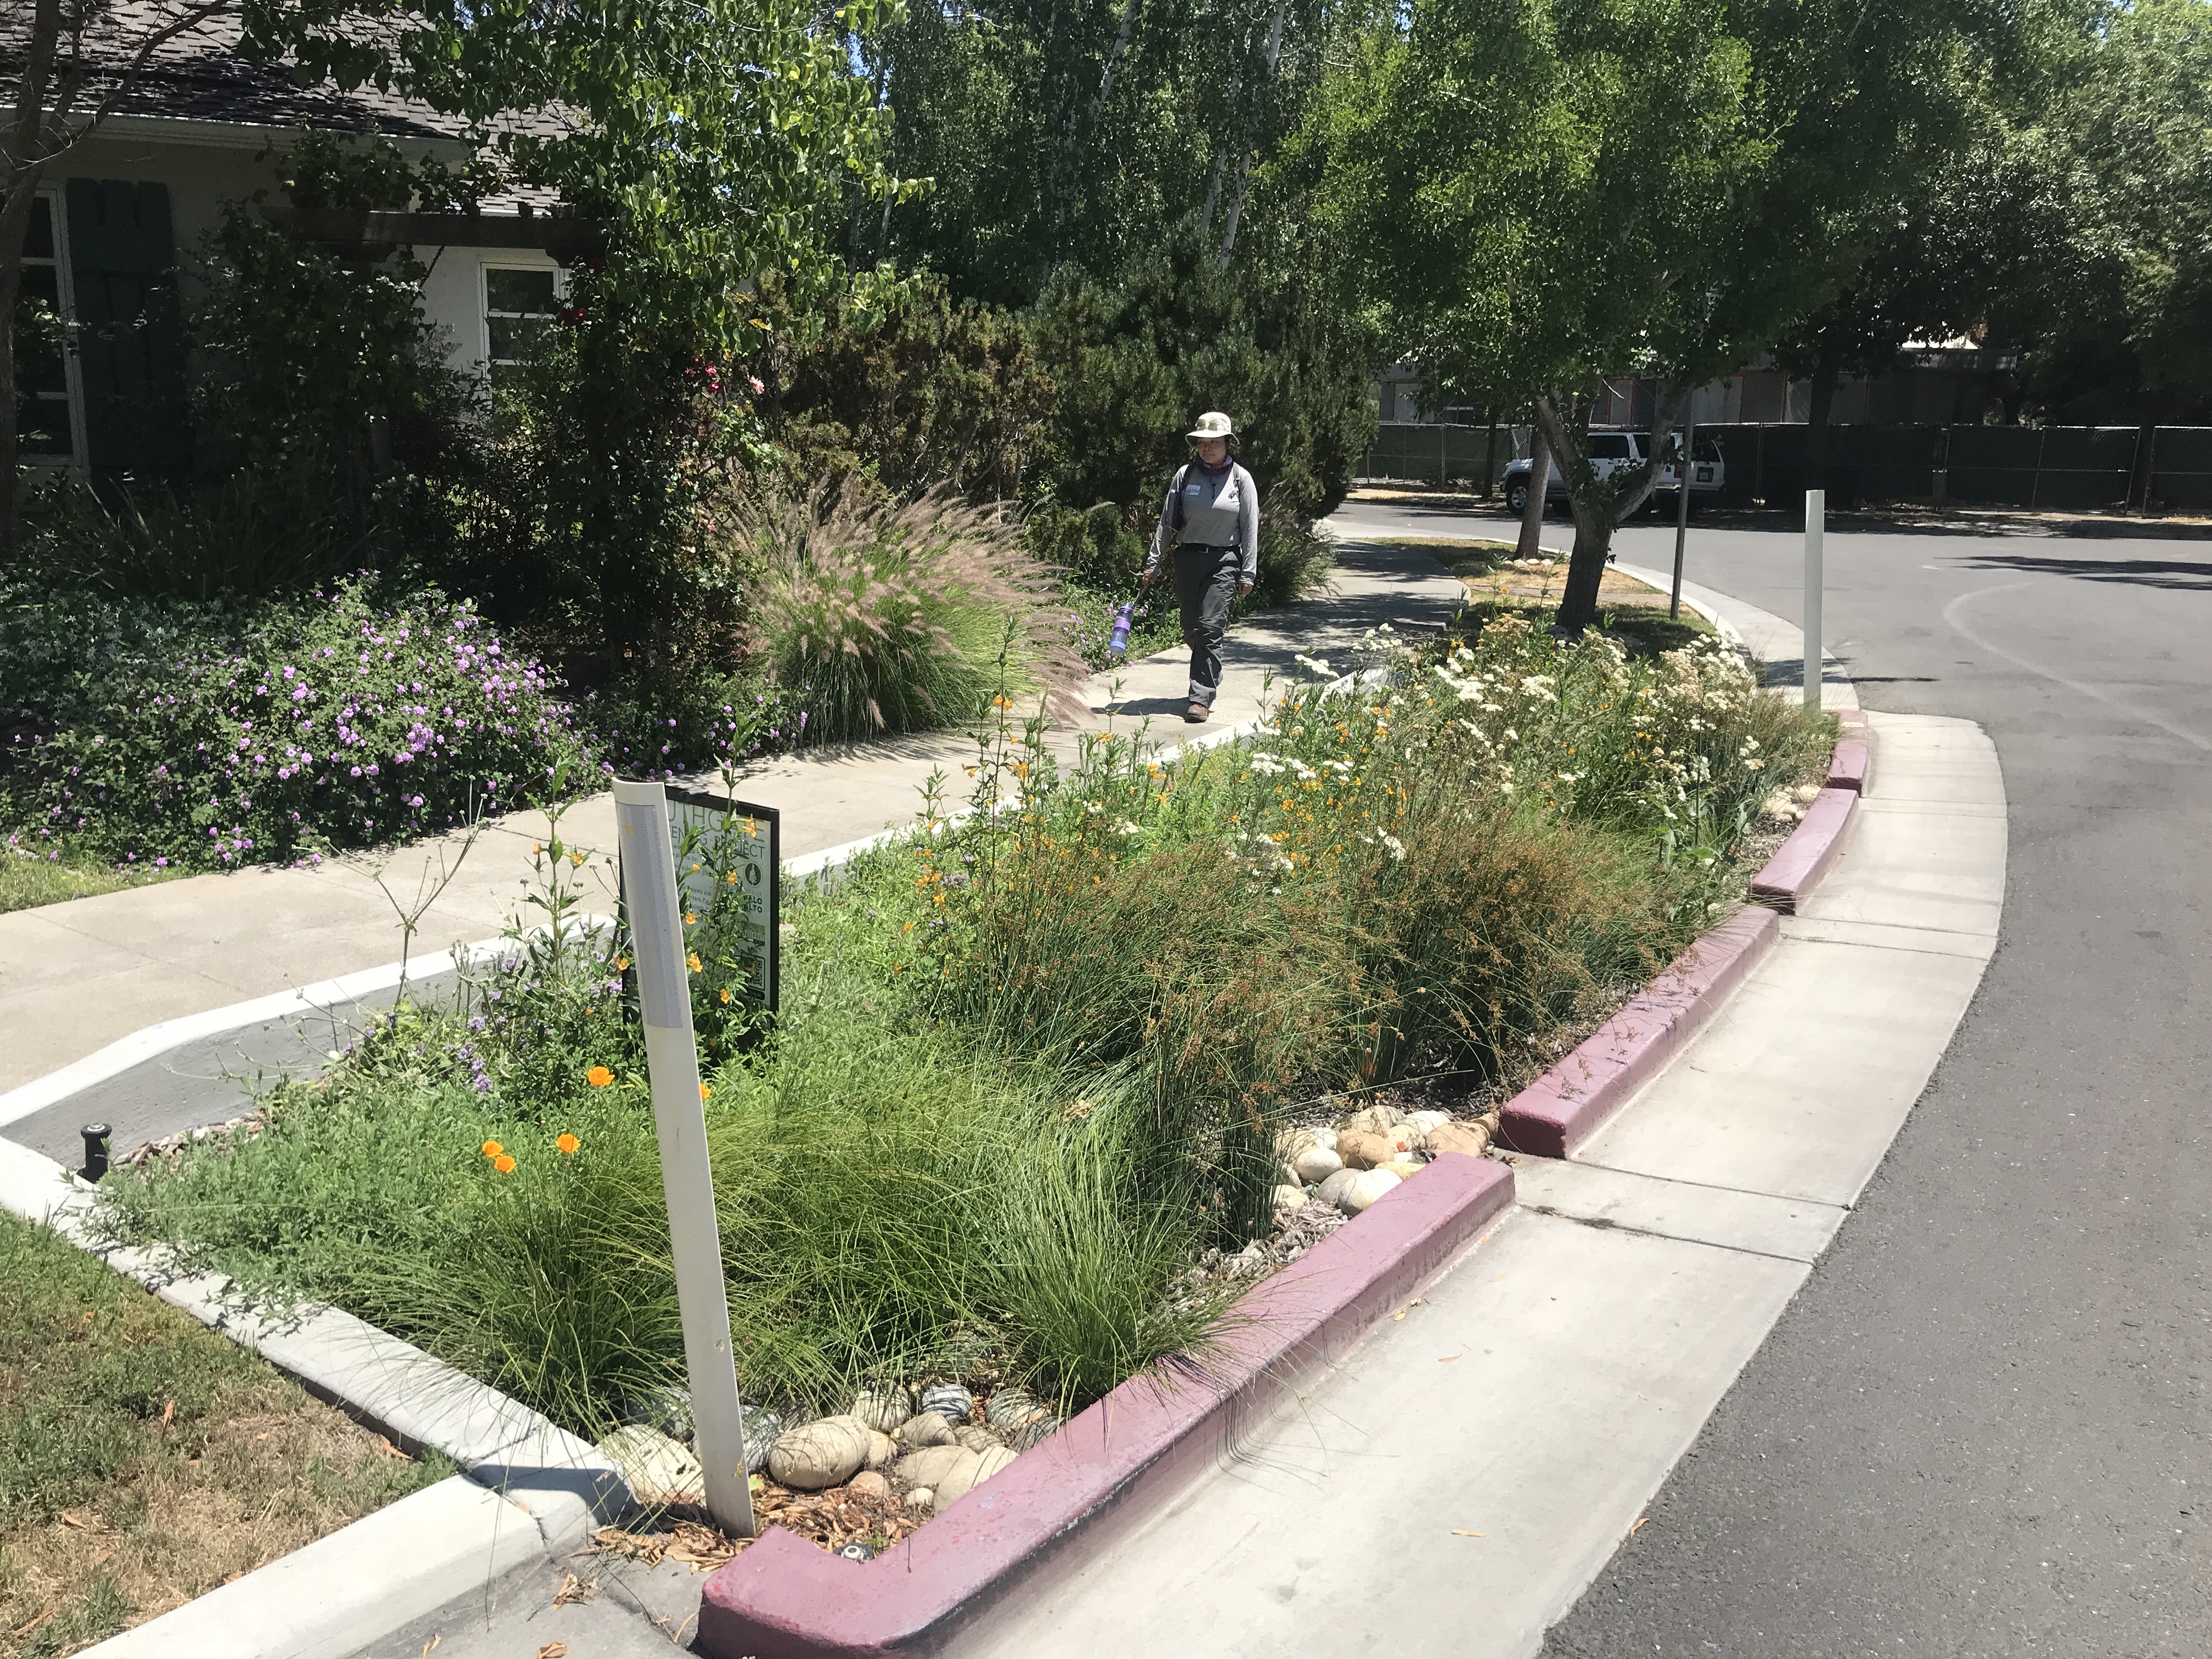 Green Stormwater Infrastructure (GSI) bioretention project